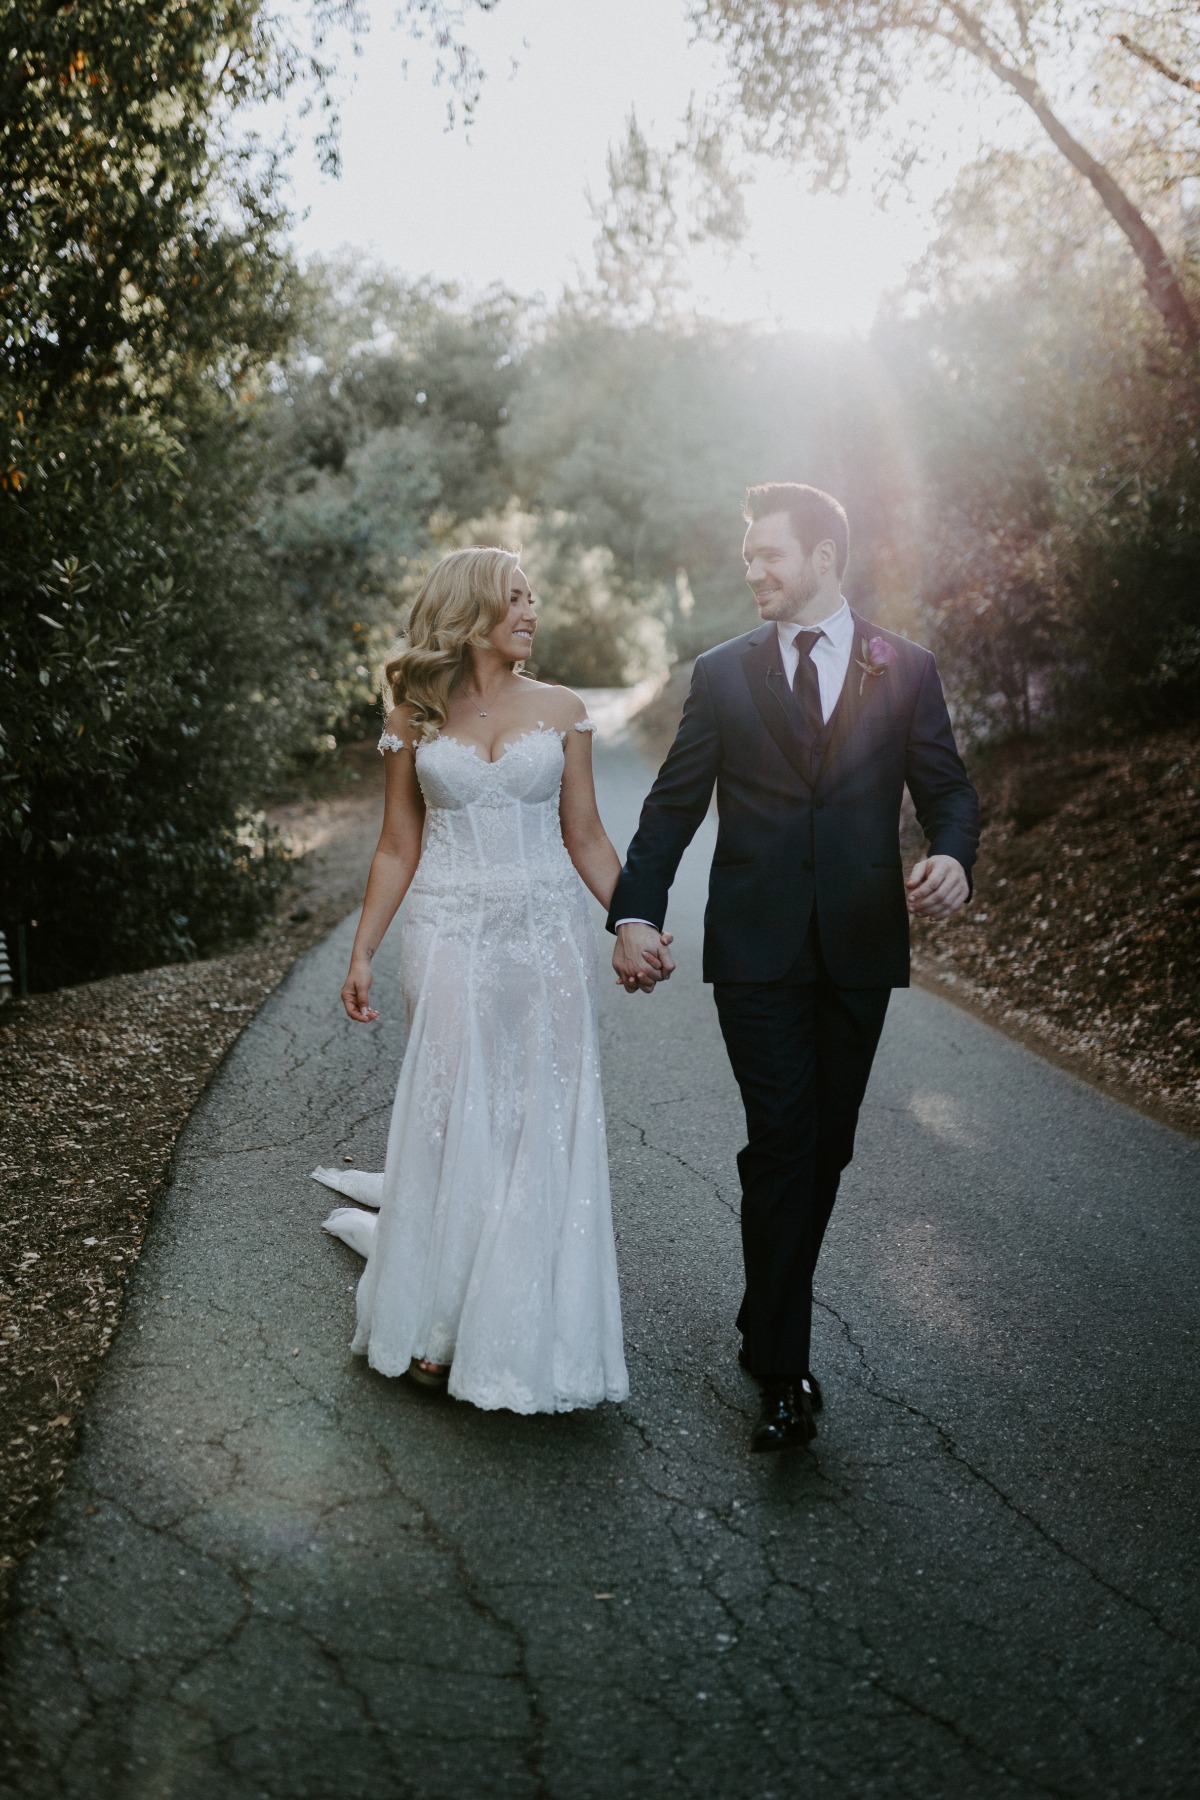 Bride and groom holding hands for portrait on road